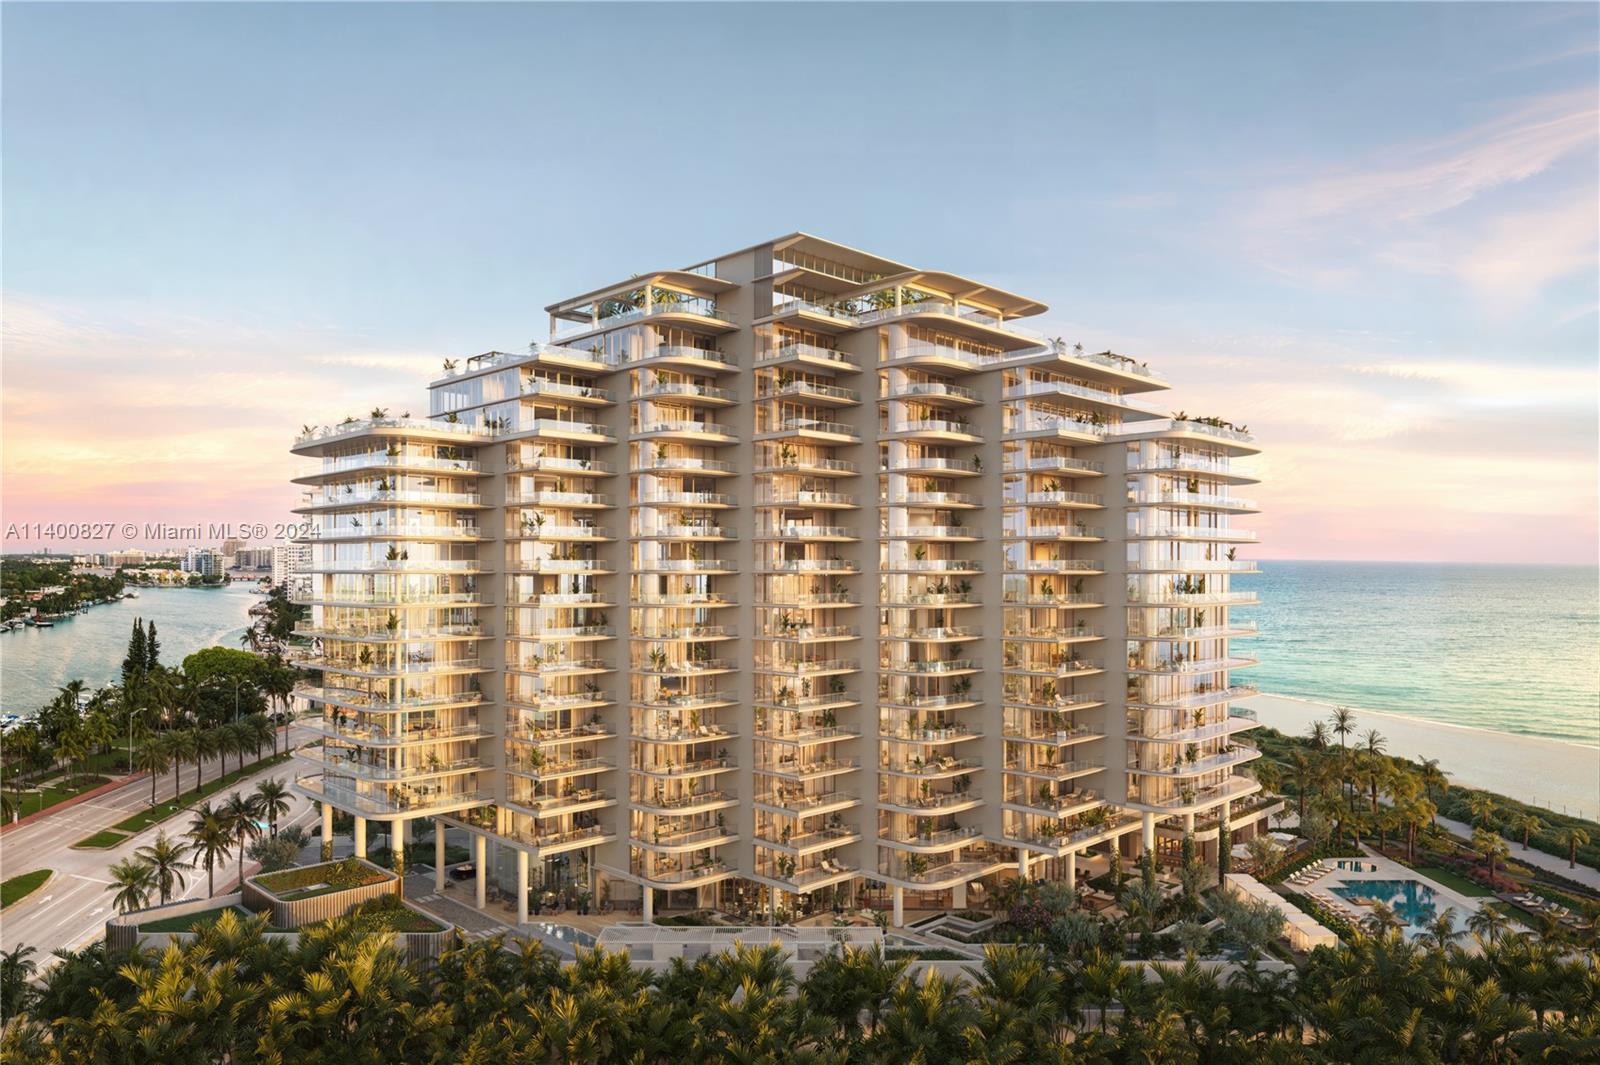 Rising from the most peaceful and expansive stretch of sand on Miami Beach’s coastline, The Perigon is an unprecedented collaboration between three global design icons. The rare seclusion, matchless amenities, and impeccable service of this unique private enclave promises residents an exclusive Miami Beach lifestyle.This 3 bedroom residence with over 3350SF of living space and 903SF of terraces makes this one of the best options on the market. Buyer chooses - Kitchen cabinets, flooring options, closets installed - Developer inventory is subject to change based on activity of sales. Gas cooking, Wolf & SubZero appliance, stone countertops Parking is self park or valet park (owners choice) - Contact the Sales Gallery to learn more about the finest new building in Miami Beach.